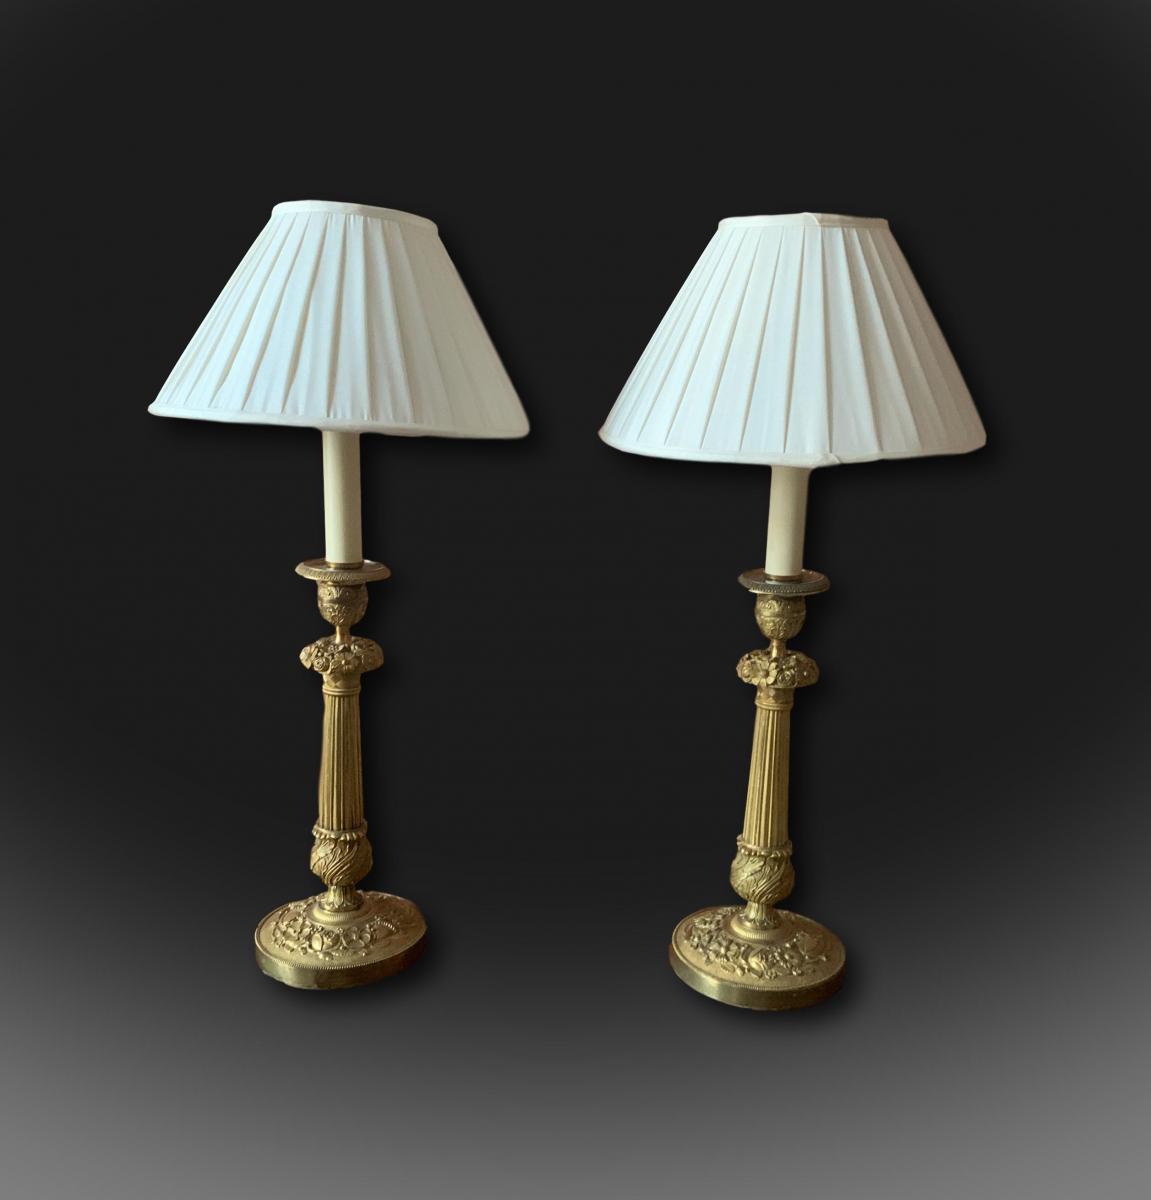 A pair of early 19th century French candlesticks converted to lamps